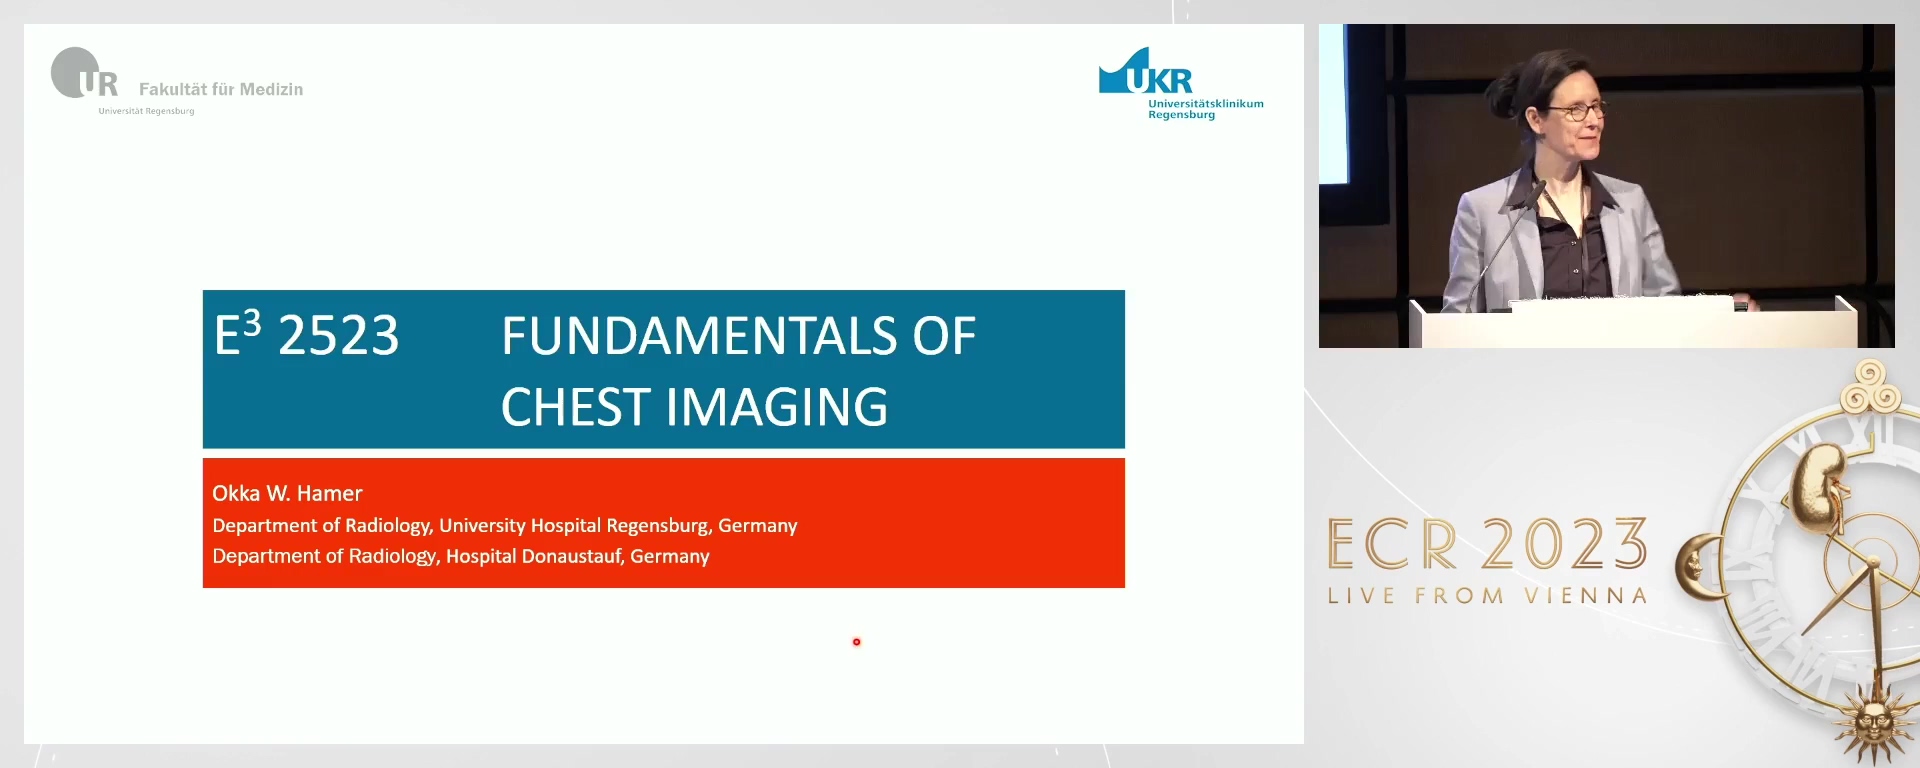 A. Fundamentals of chest imaging